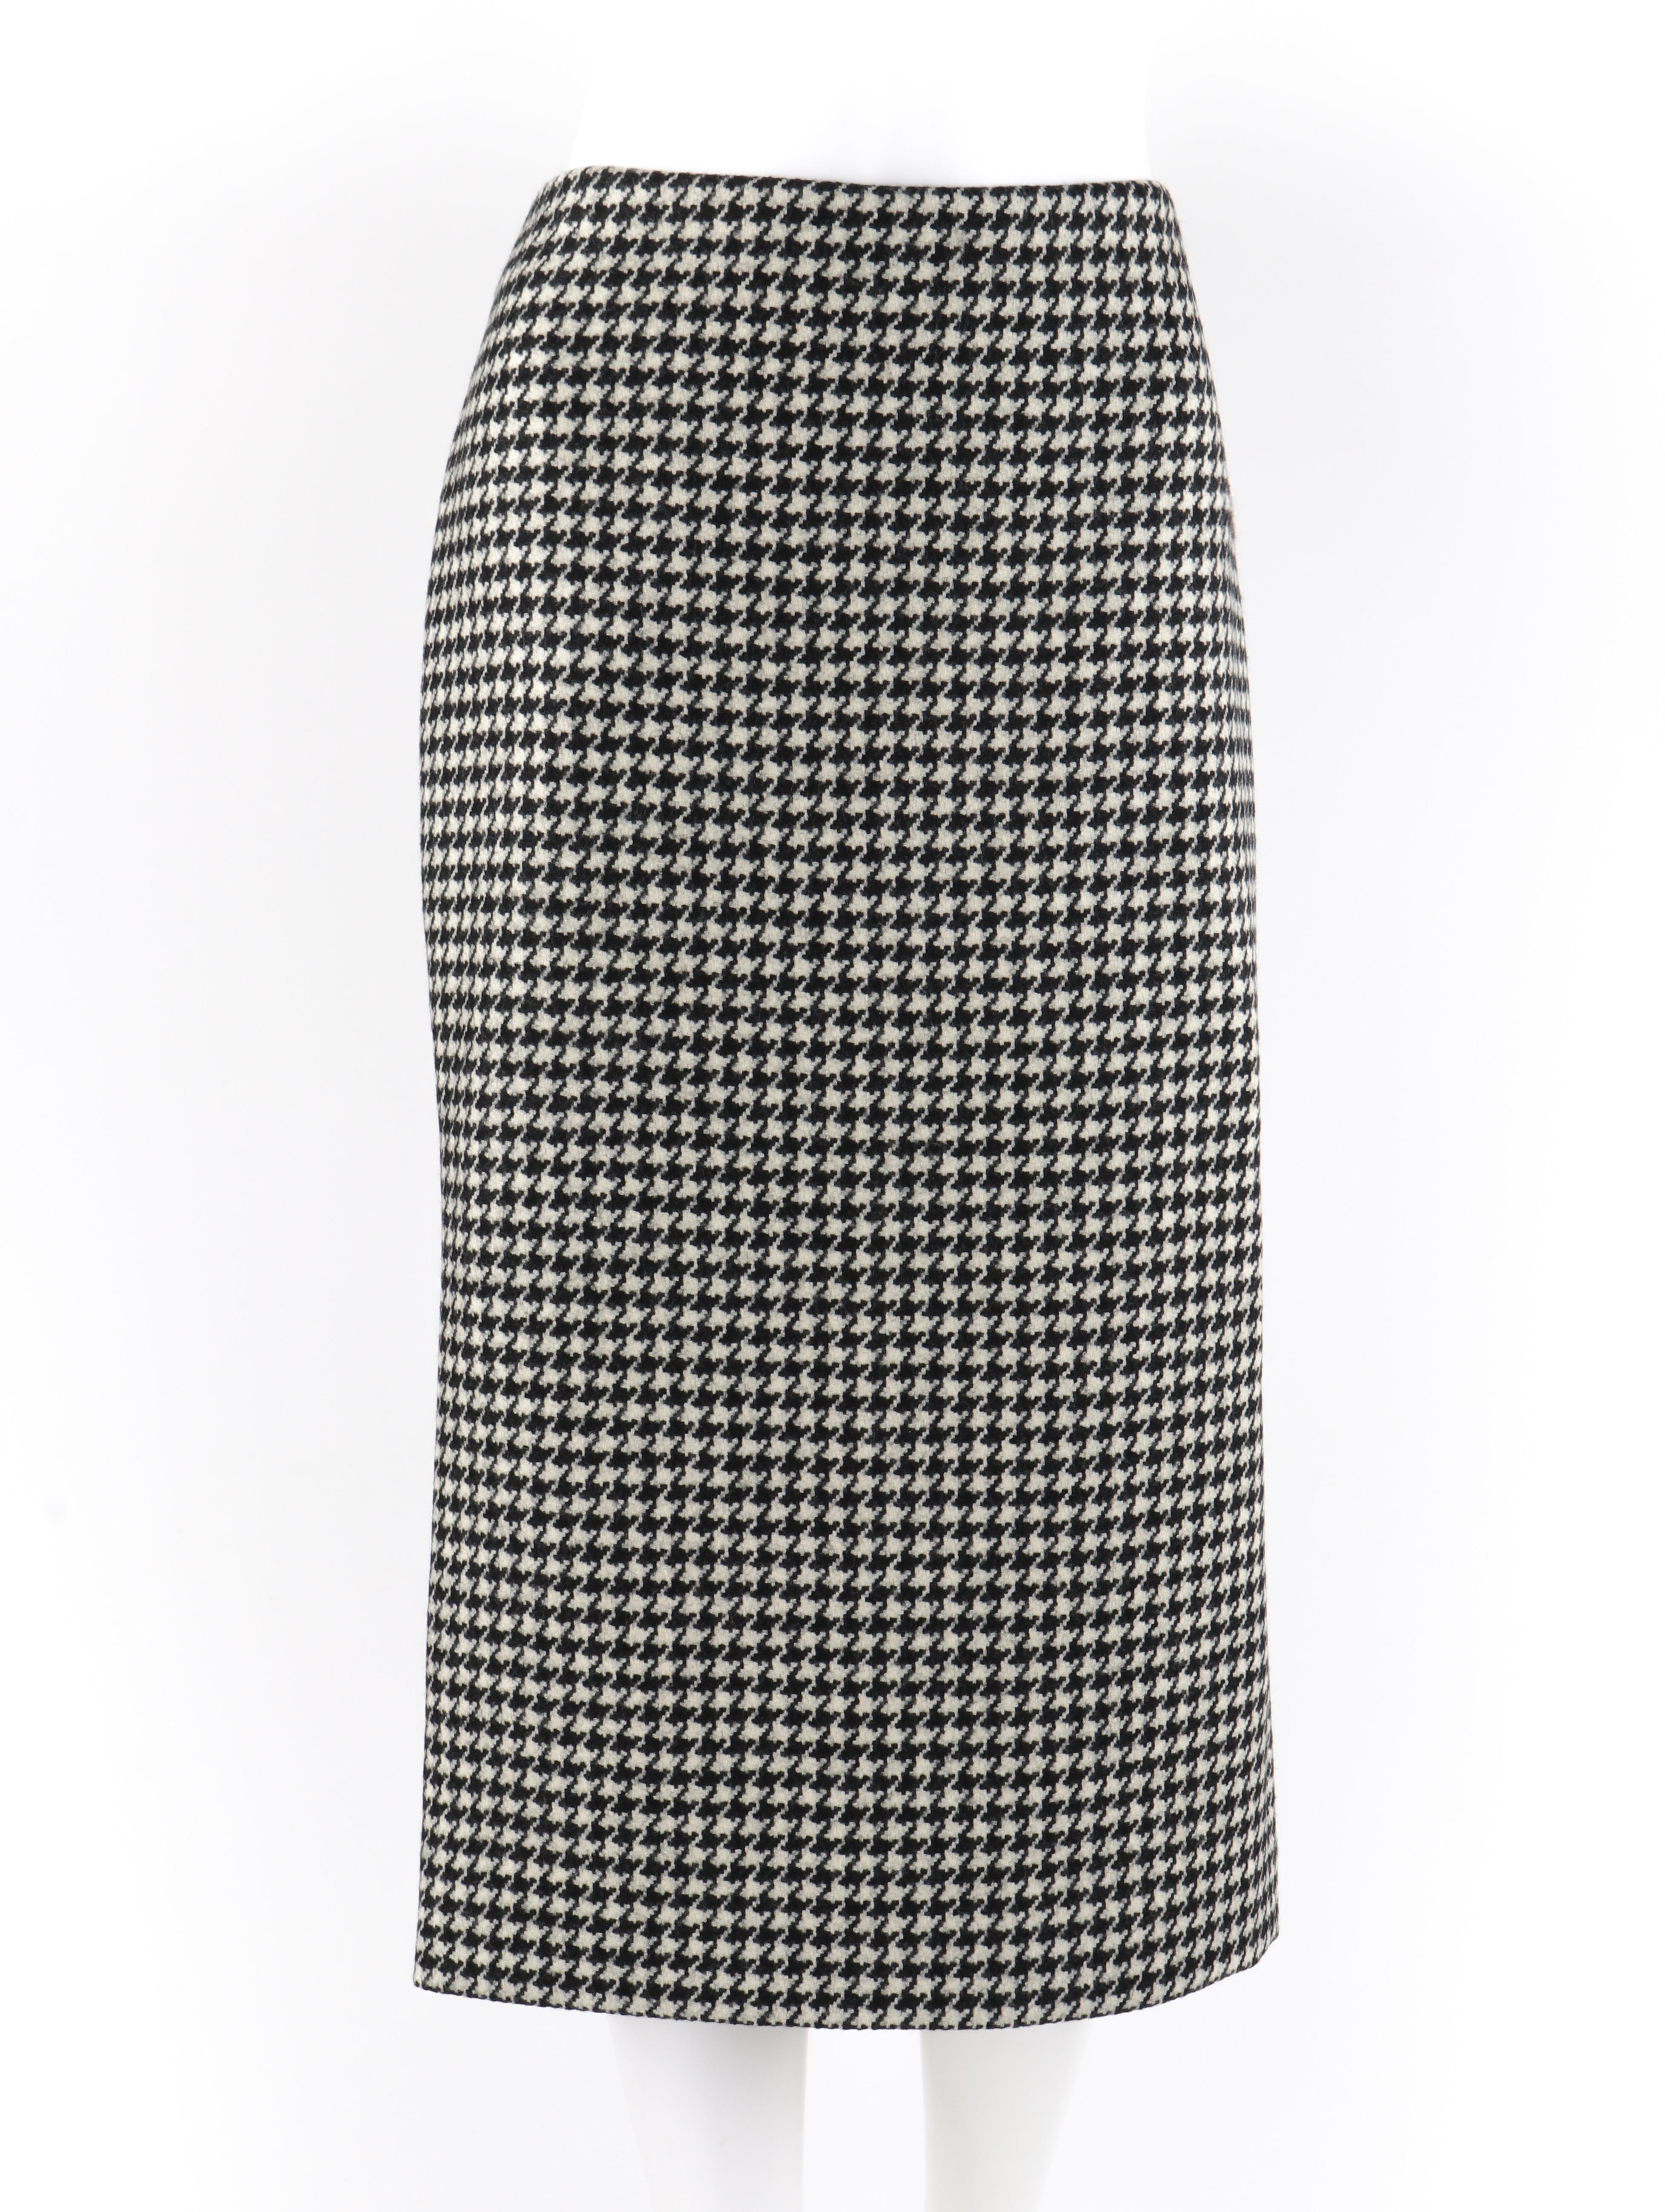 This Alexander McQueen dogtooth pencil skirt is gorgeously created in one of his final collections A/W 2009 